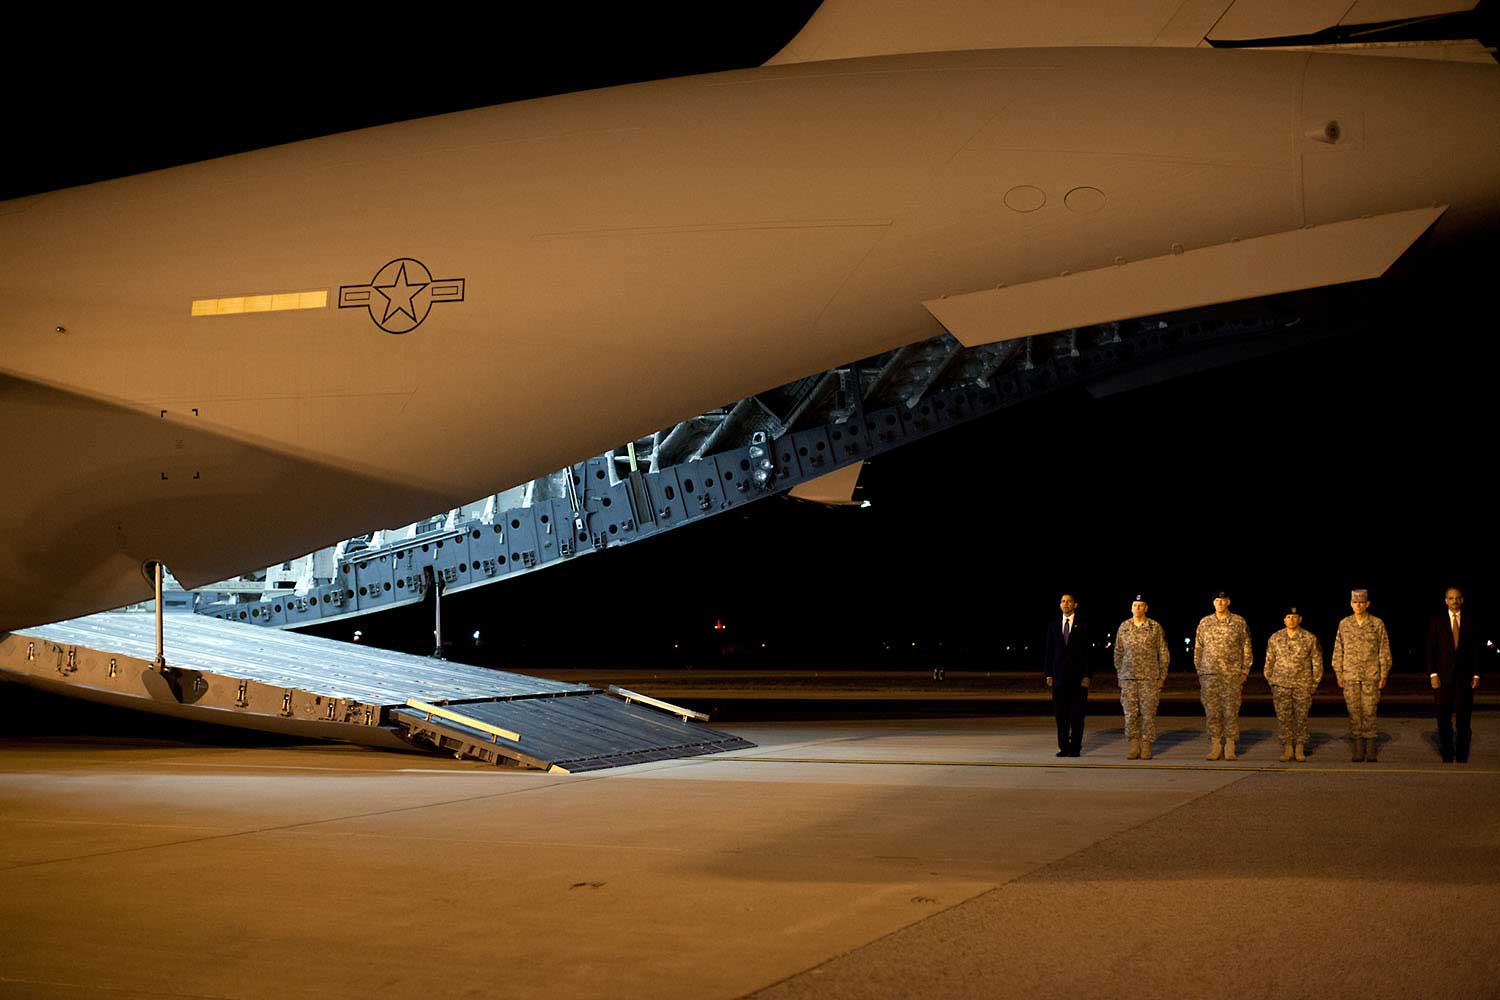 “This photo was taken about 4AM, Oct. 29, 2009, after the President made an unannounced trip to Dover Air Force Base to pay respects to fallen troops coming back from Afghanistan. After meeting privately with the families, the President walked alone up the ramp of the cargo plane carrying the 18 caskets, all draped in American flags. I could see the emotion on his face as he walked from casket to casket, leaving a Presidential coin on each. When he was done, he paused for a few minutes, head bowed in prayer. I heard him tell others later how that was the most difficult moment of his Presidency thus far. Out of respect for the families, not all of who wanted their ceremony photographed, we can’t show those pictures (but they will become part of Presidential archive.)"